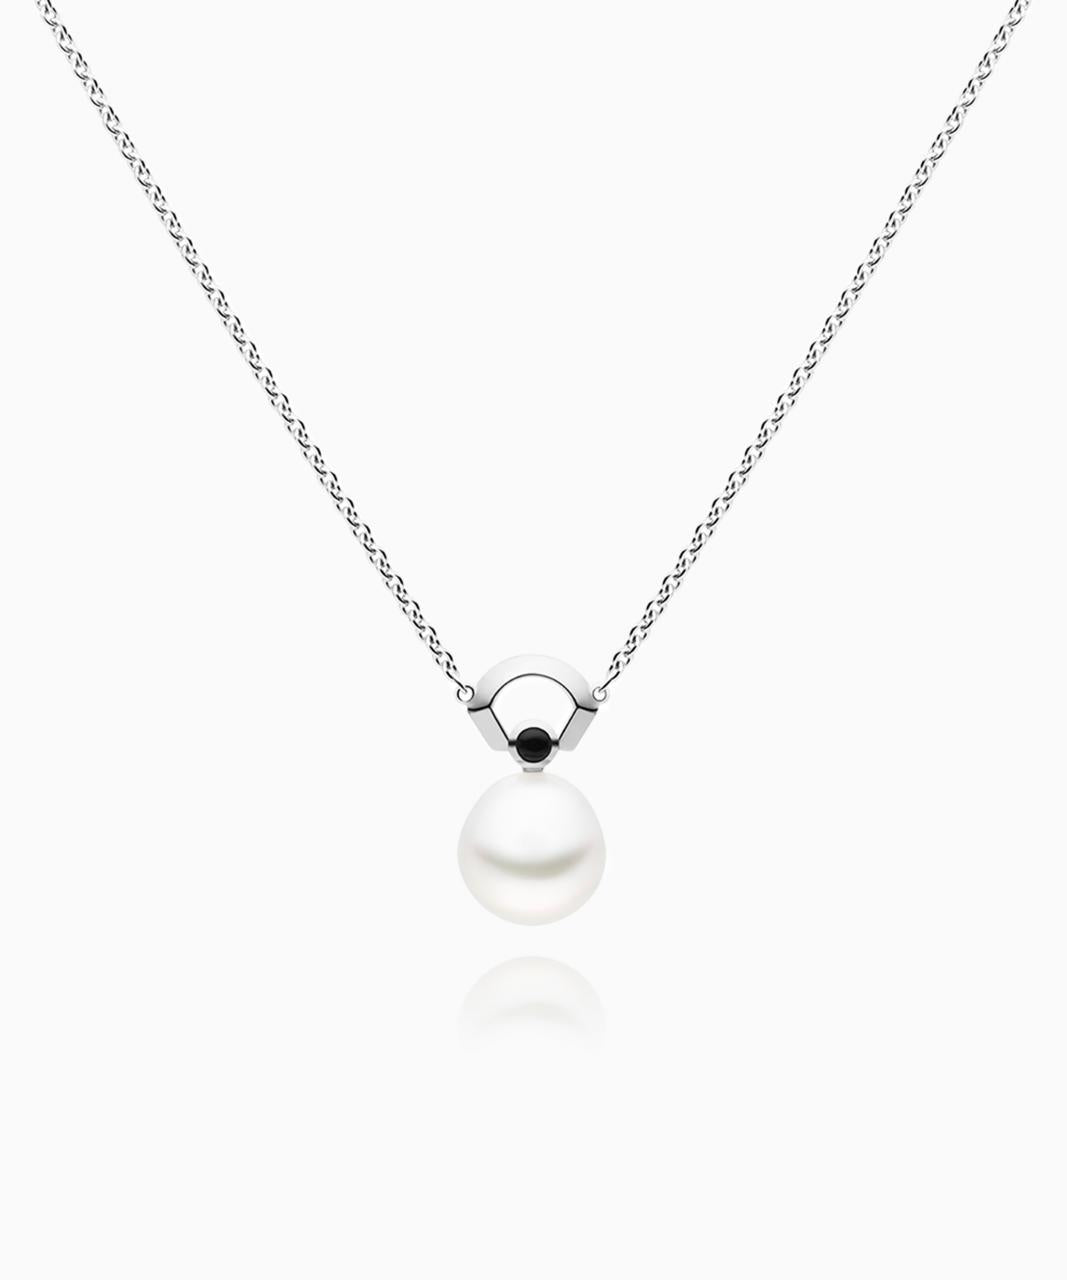 Kailis – Odyssey Pearl Necklace, Sterling Silver